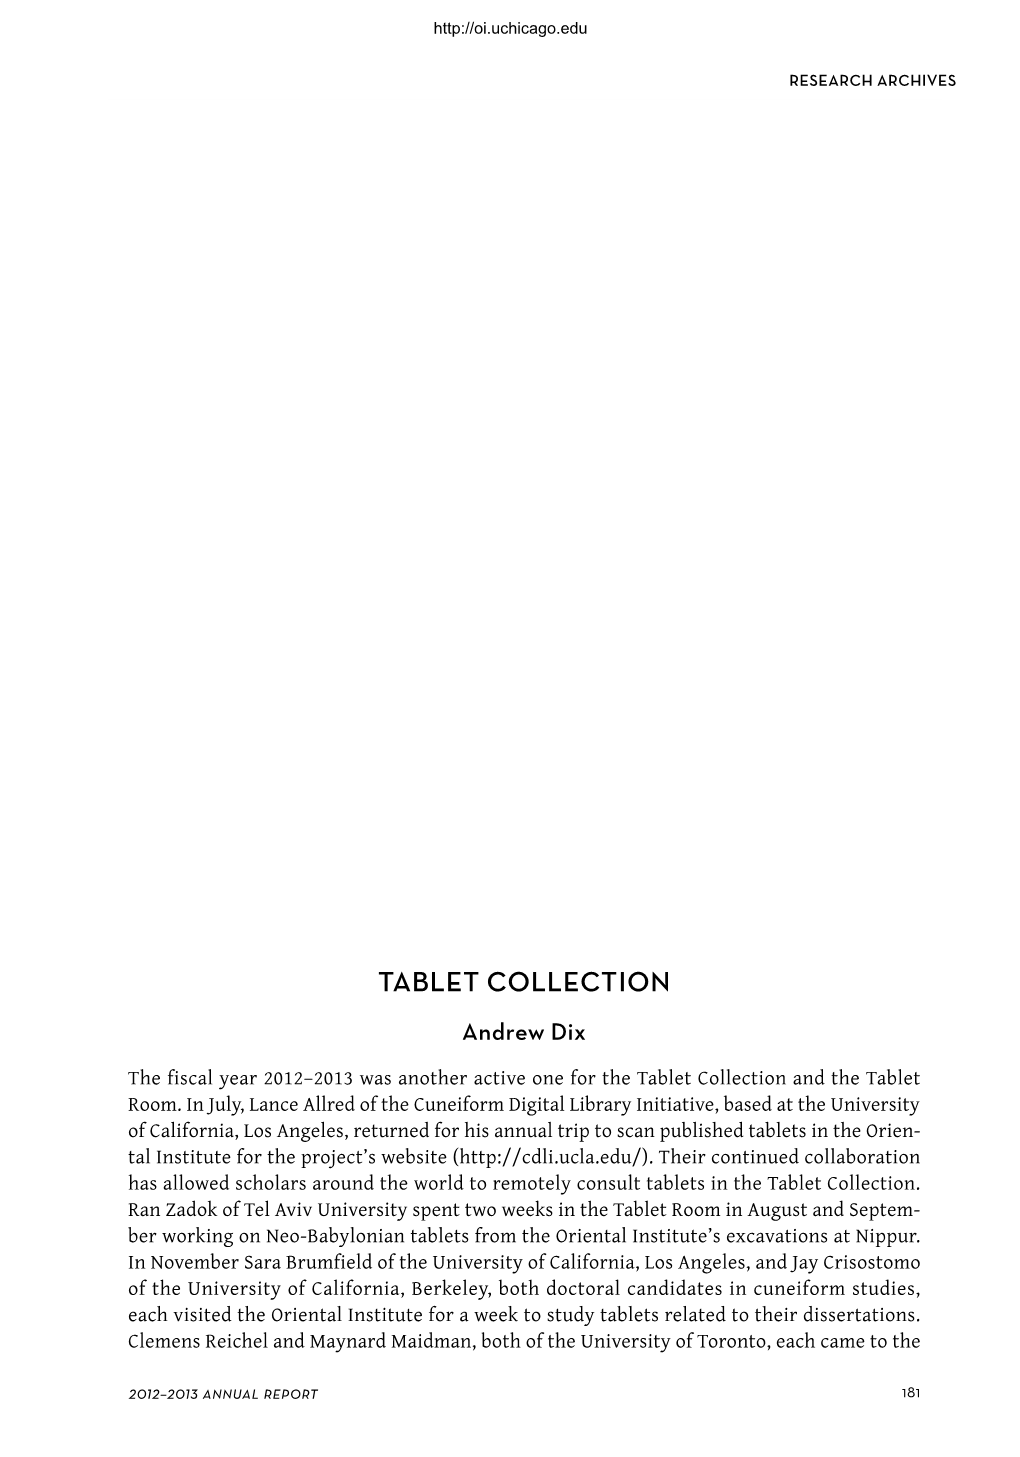 Tablet Collection Andrew Dix